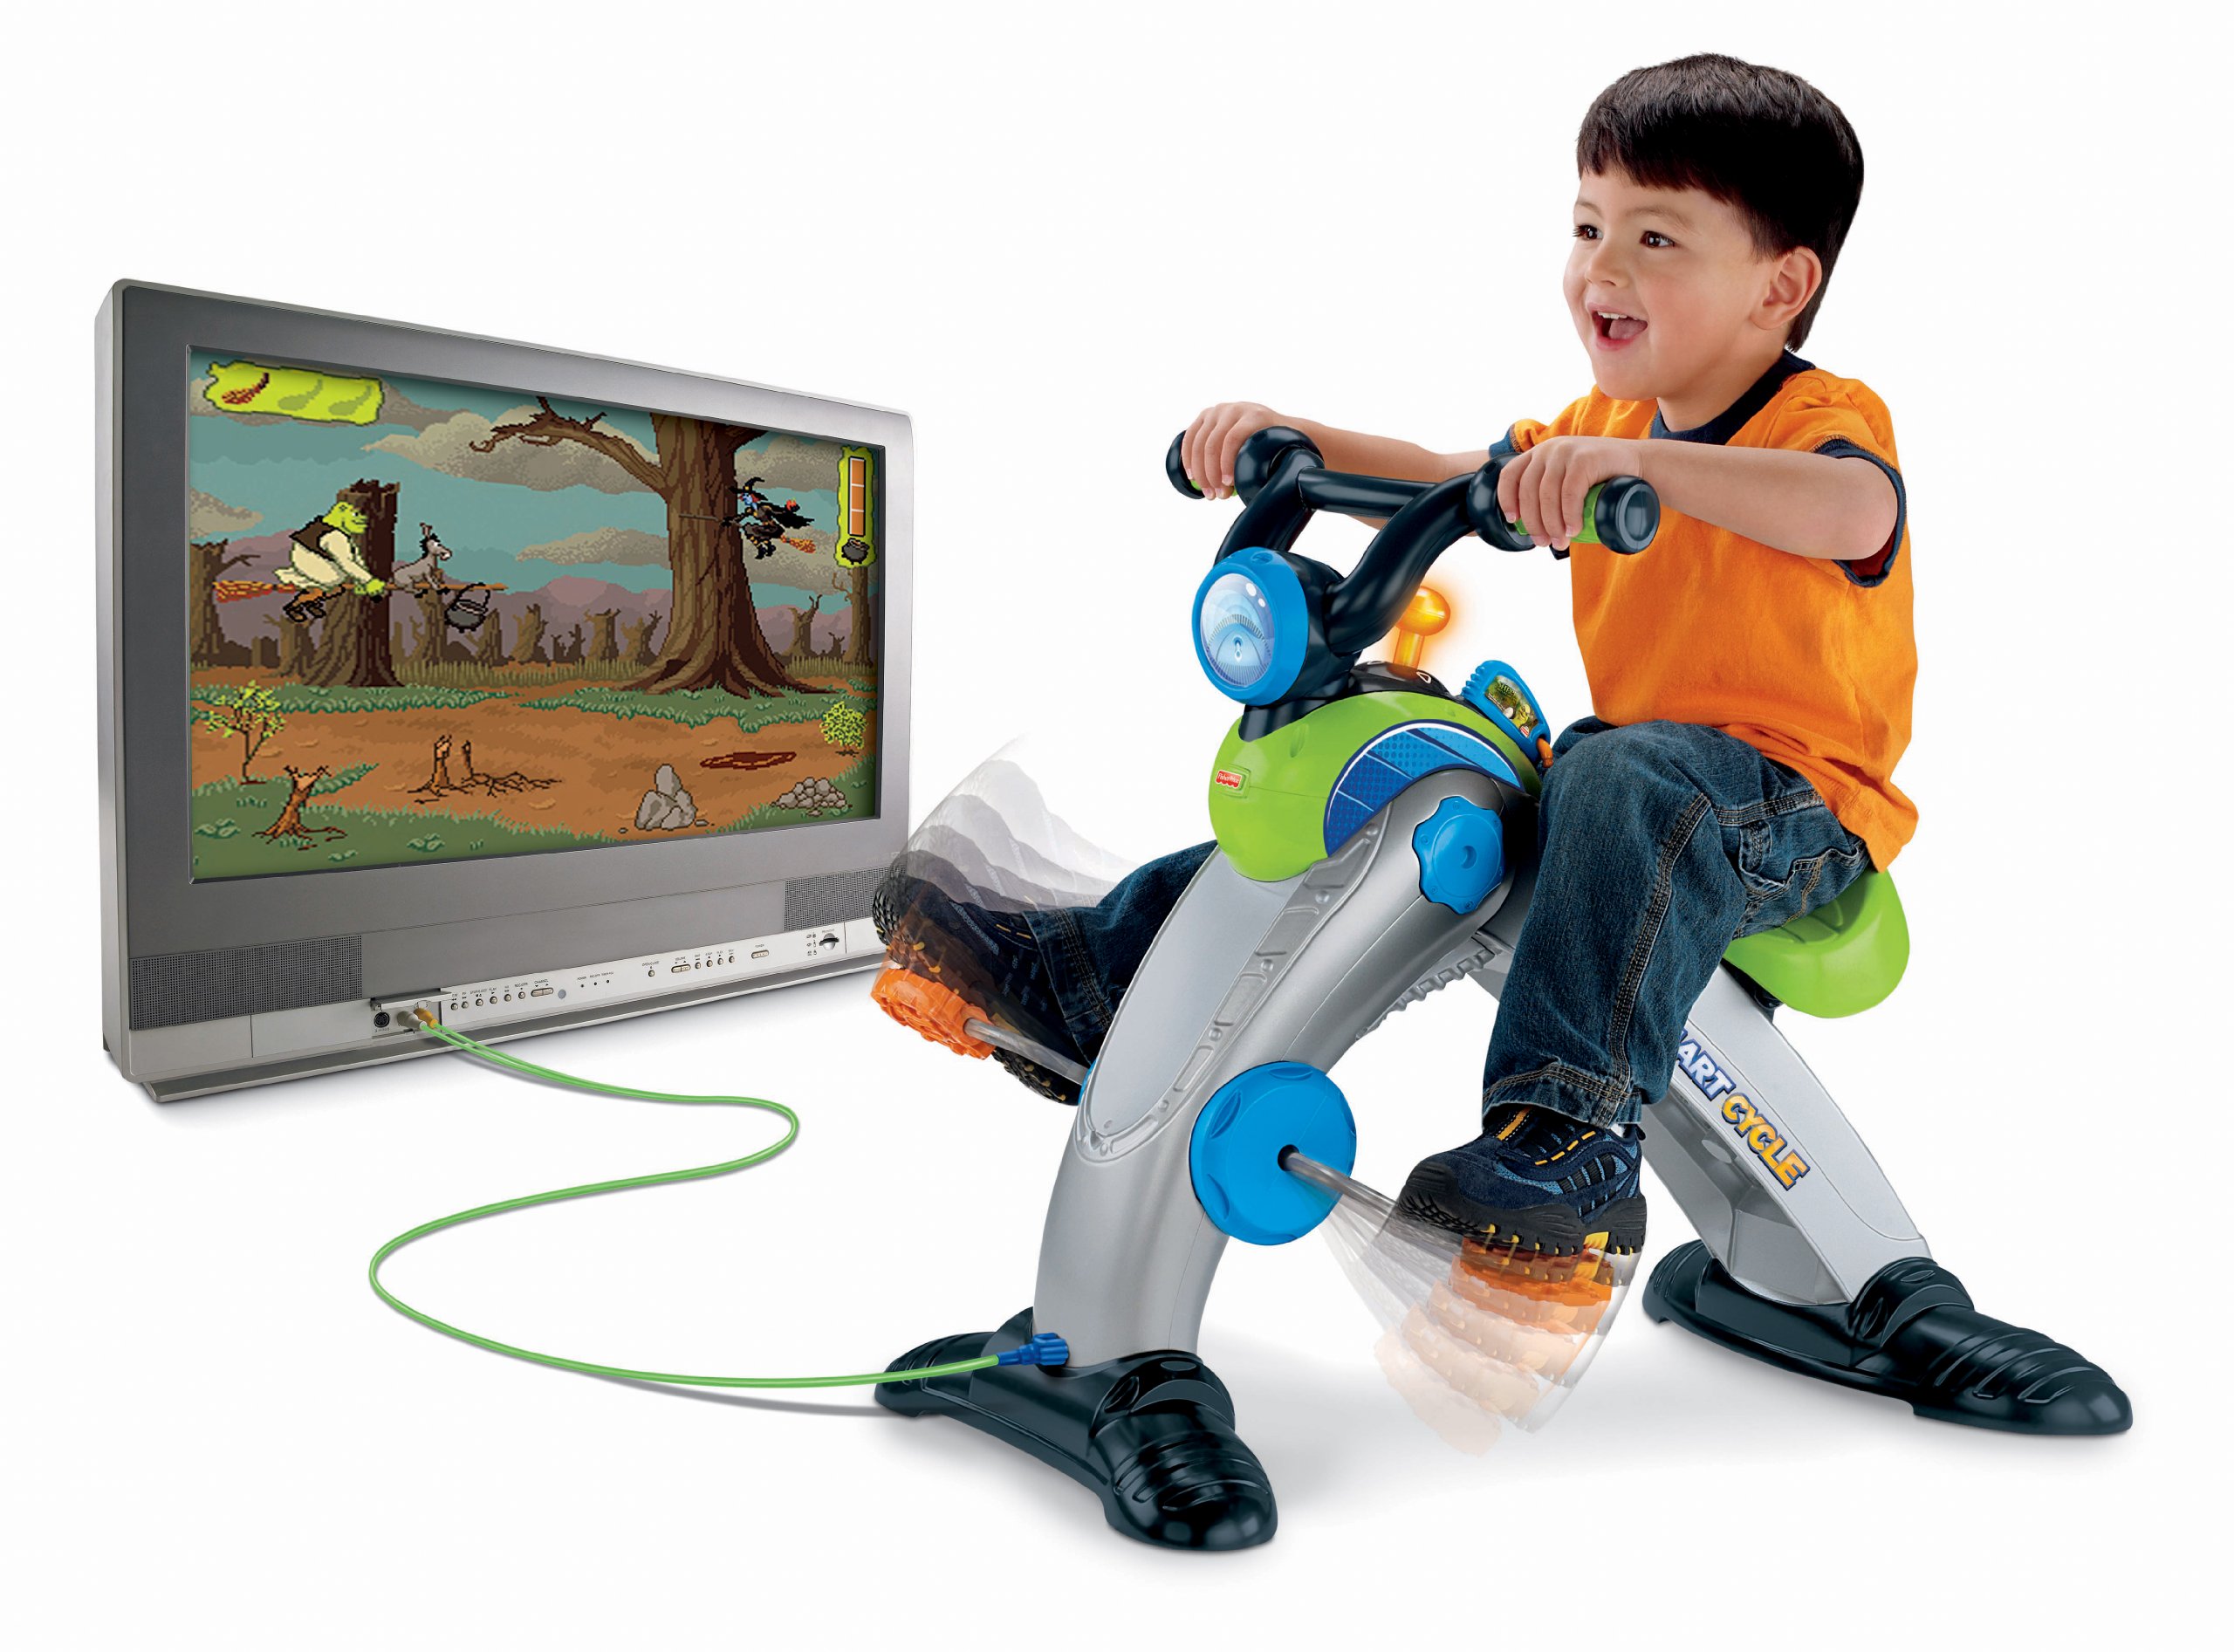 Fisher-Price Smart Cycle [Old Version] Shrek Forever After Software Cartridge